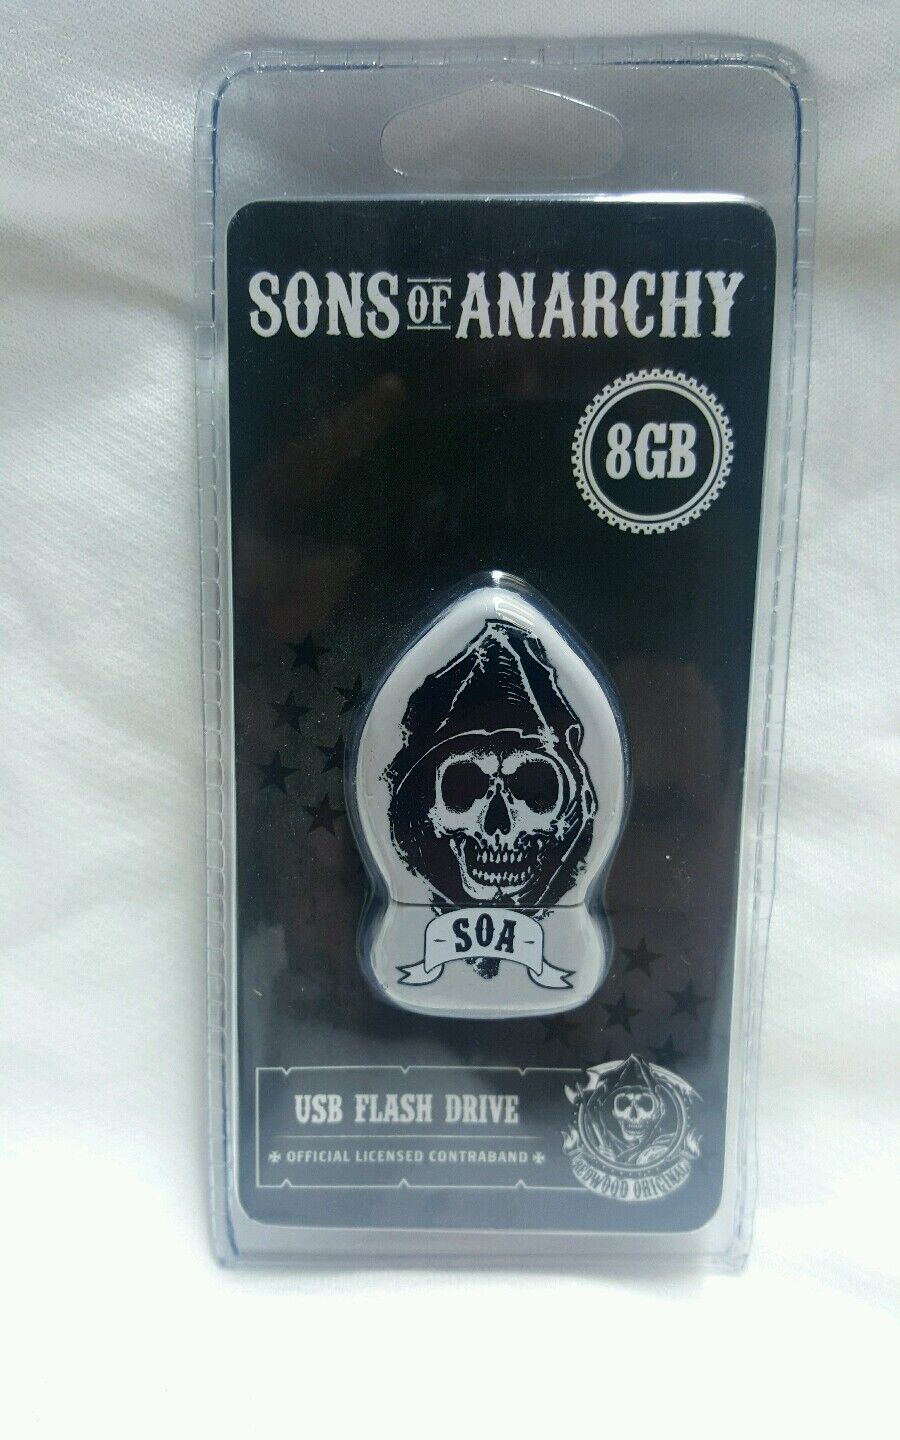 Sons of Anarchy 8GB USB Flash Drive w/ Reaper Design SAMCRO.New, factory sealed 